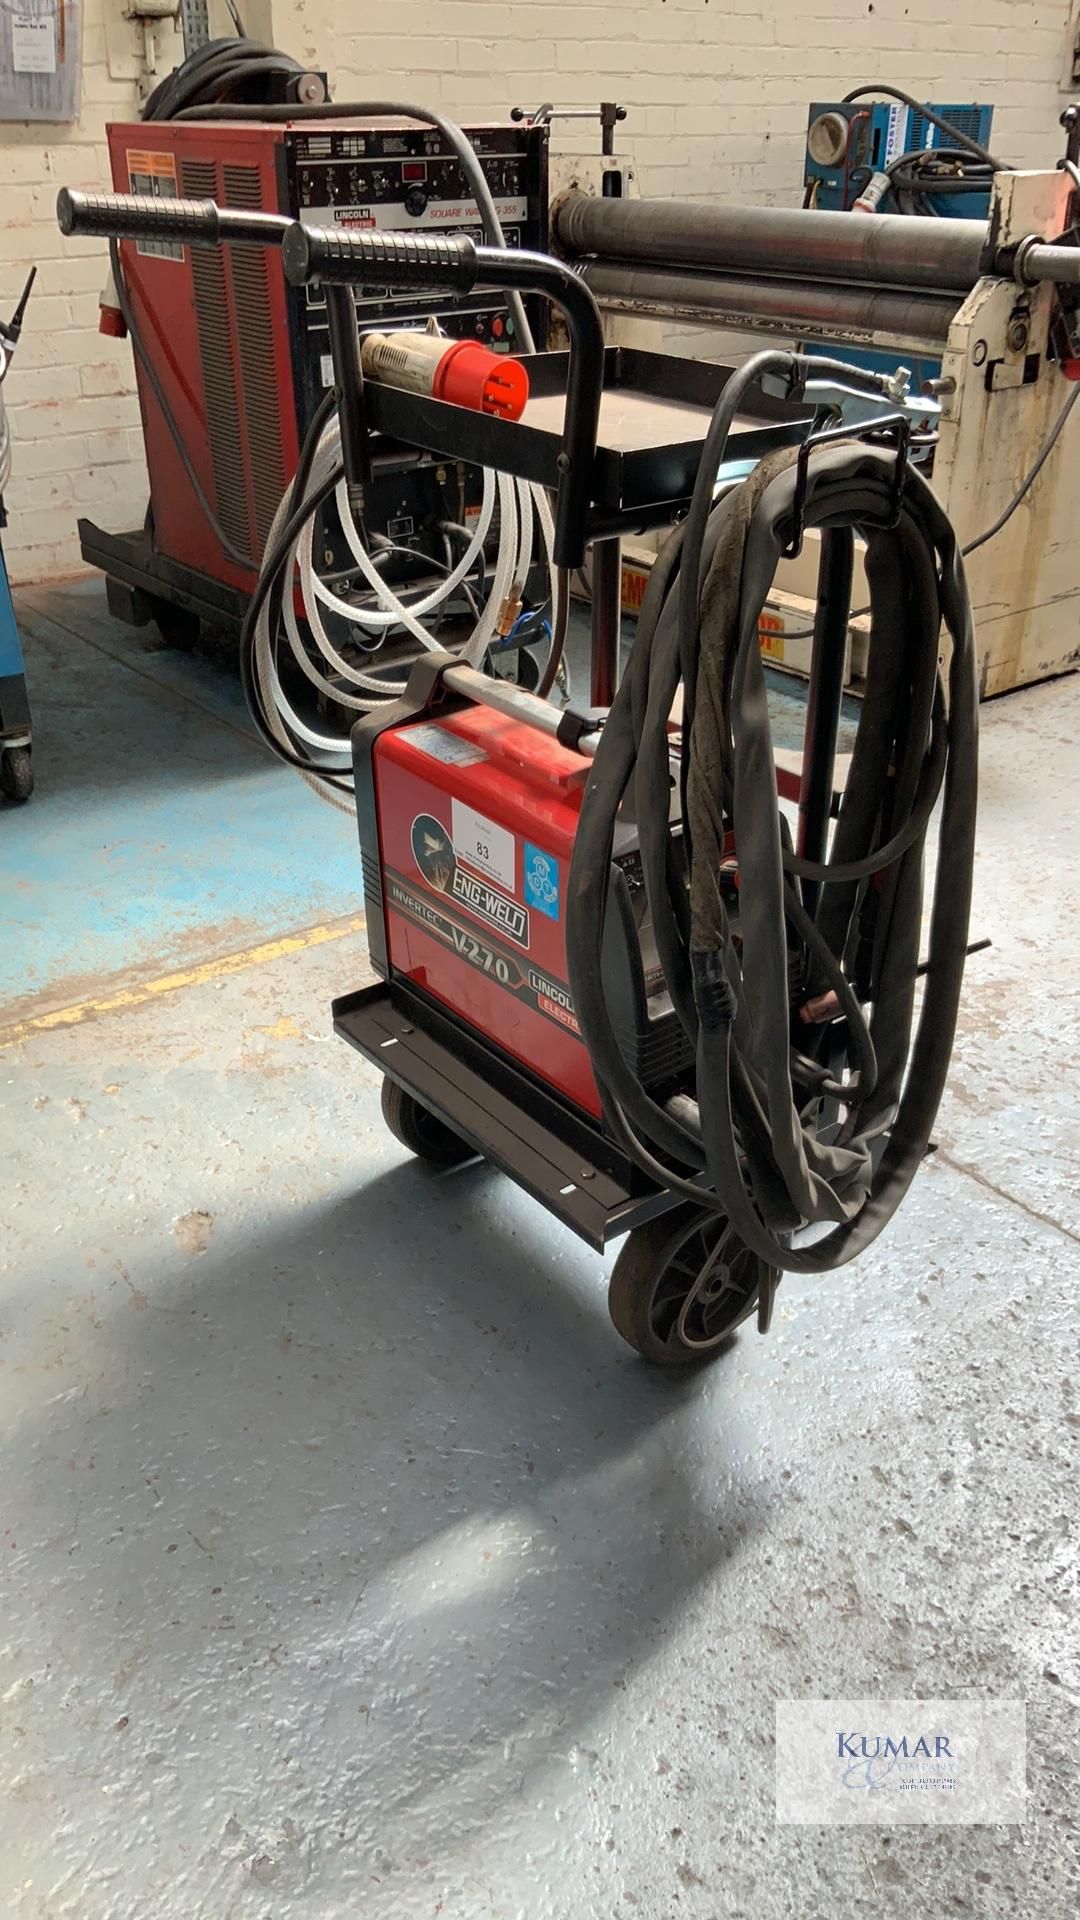 Lincoln Electric Invertec V270 T Tig DC Welding Power Source, Serial No.P1140602807 with Trolley